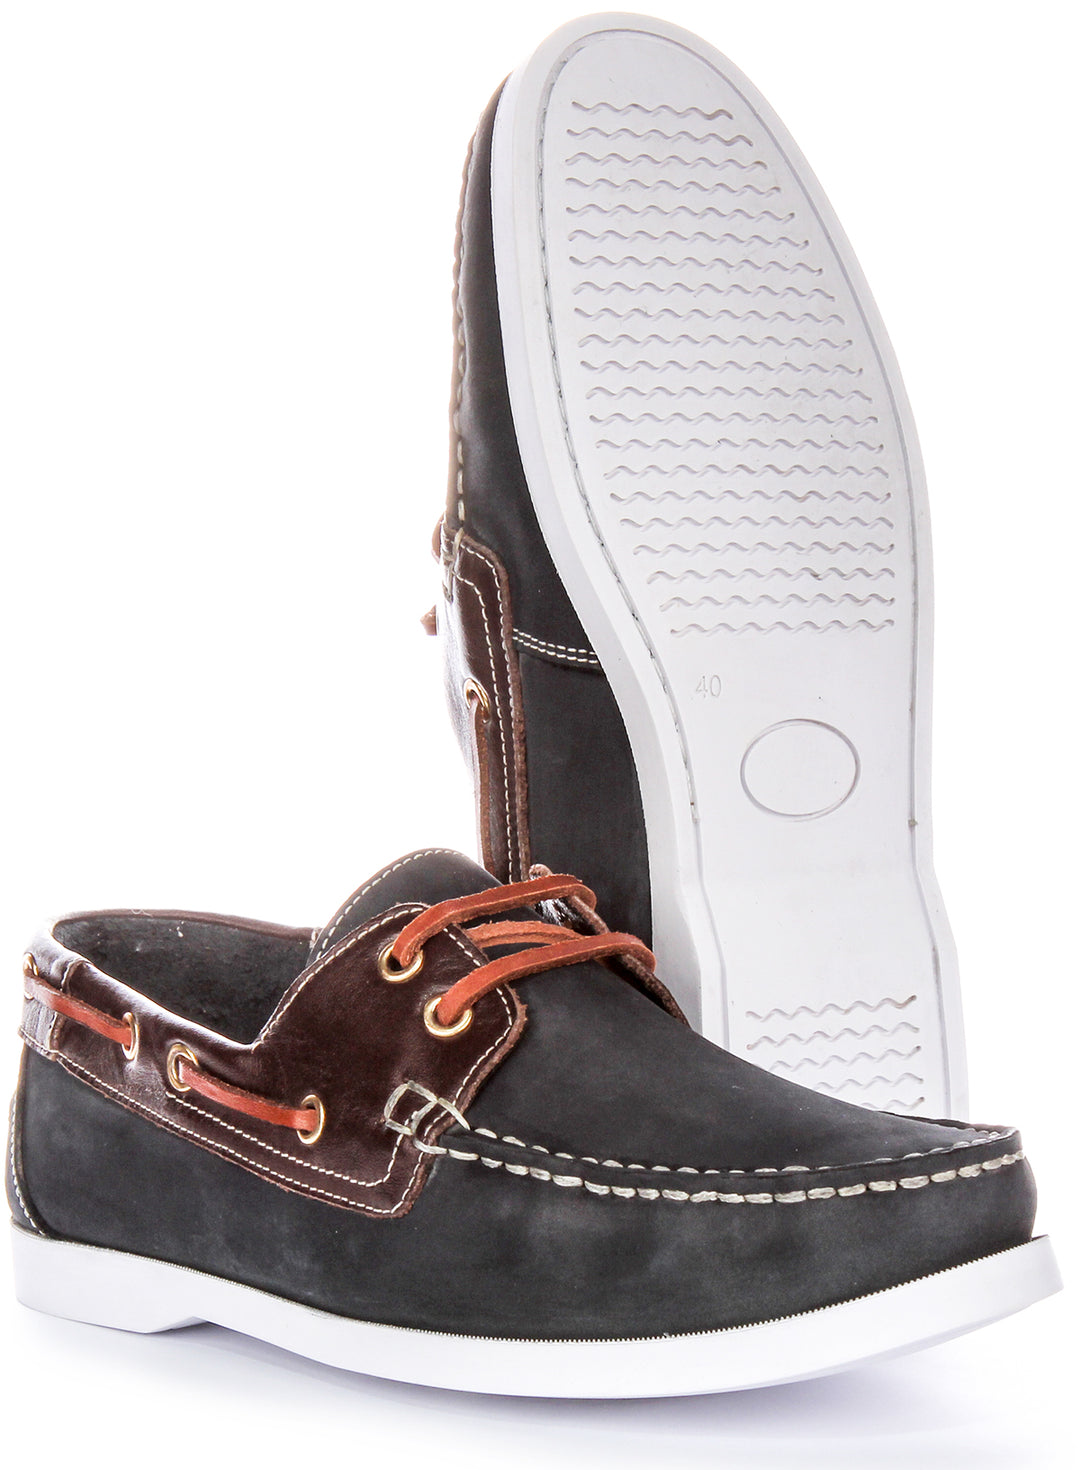 Bay Boat Shoes In Navy Brown